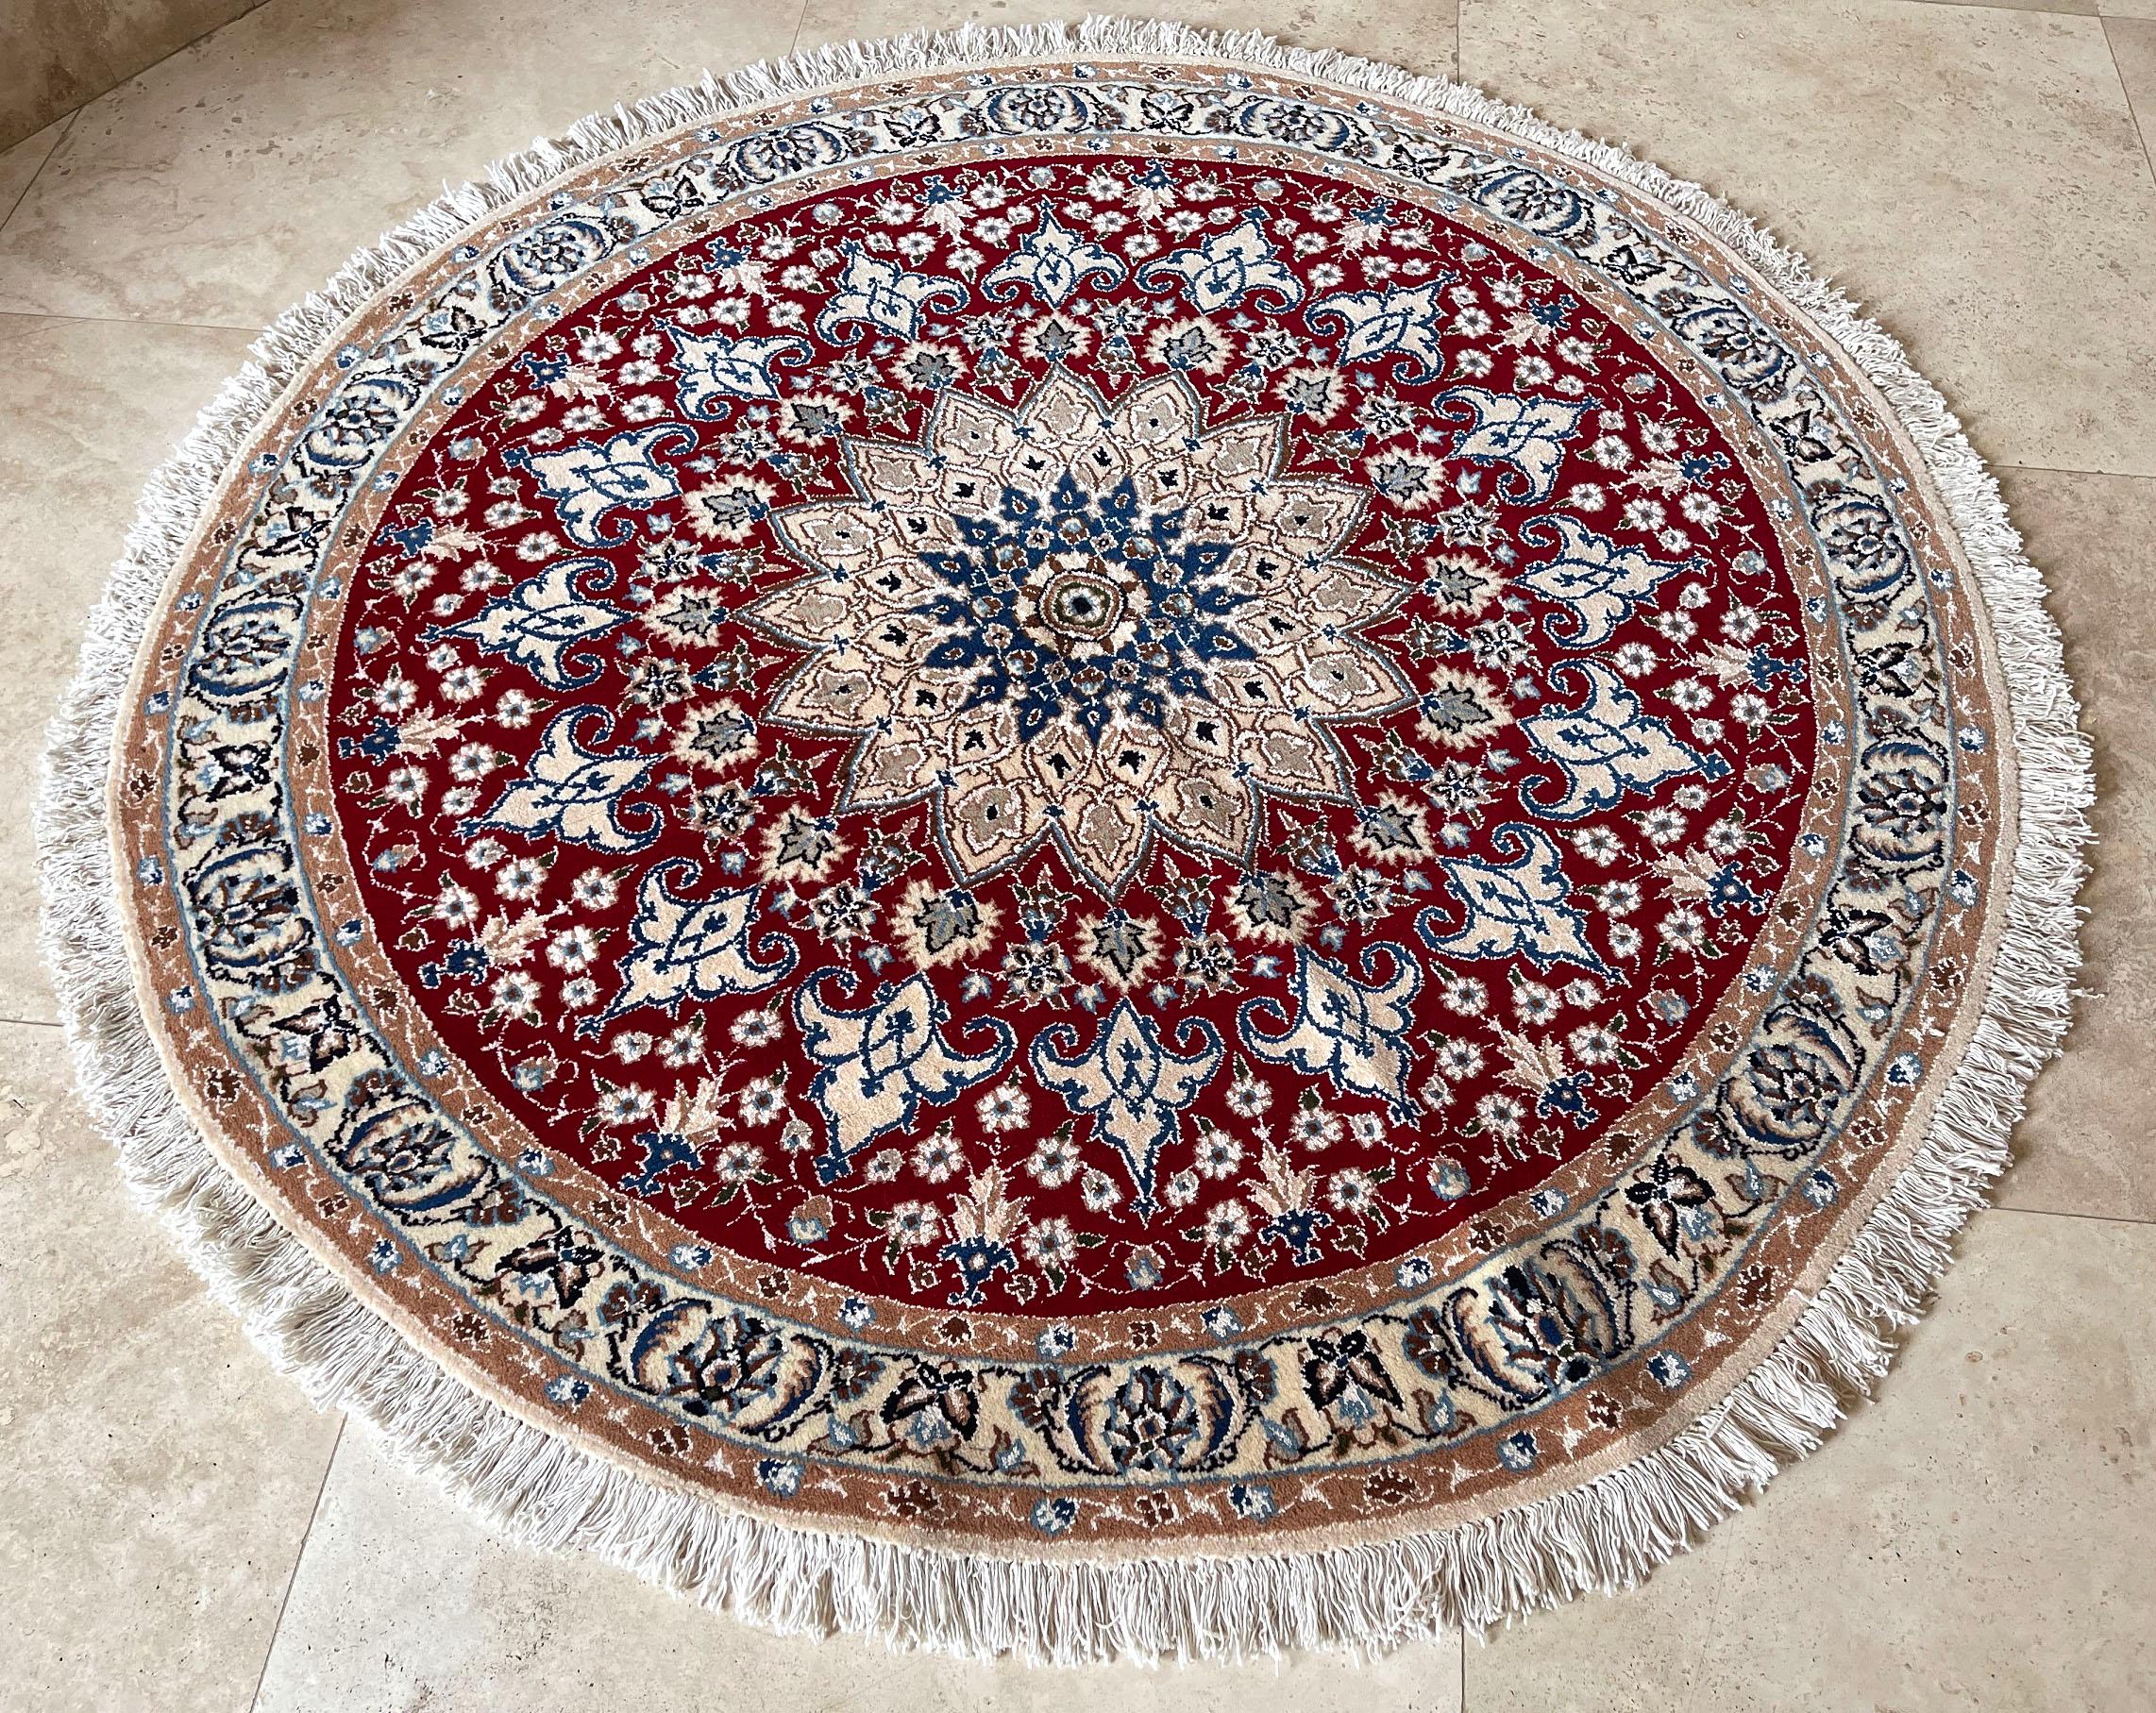 Persian hand knotted medallion floral cream red nain round rug 
This authentic Persian round hand-made Nain (9 LA) rug has wool and silk pile with cotton foundation. Nain is a city in Iran that is well known for producing fine handmade rug. This